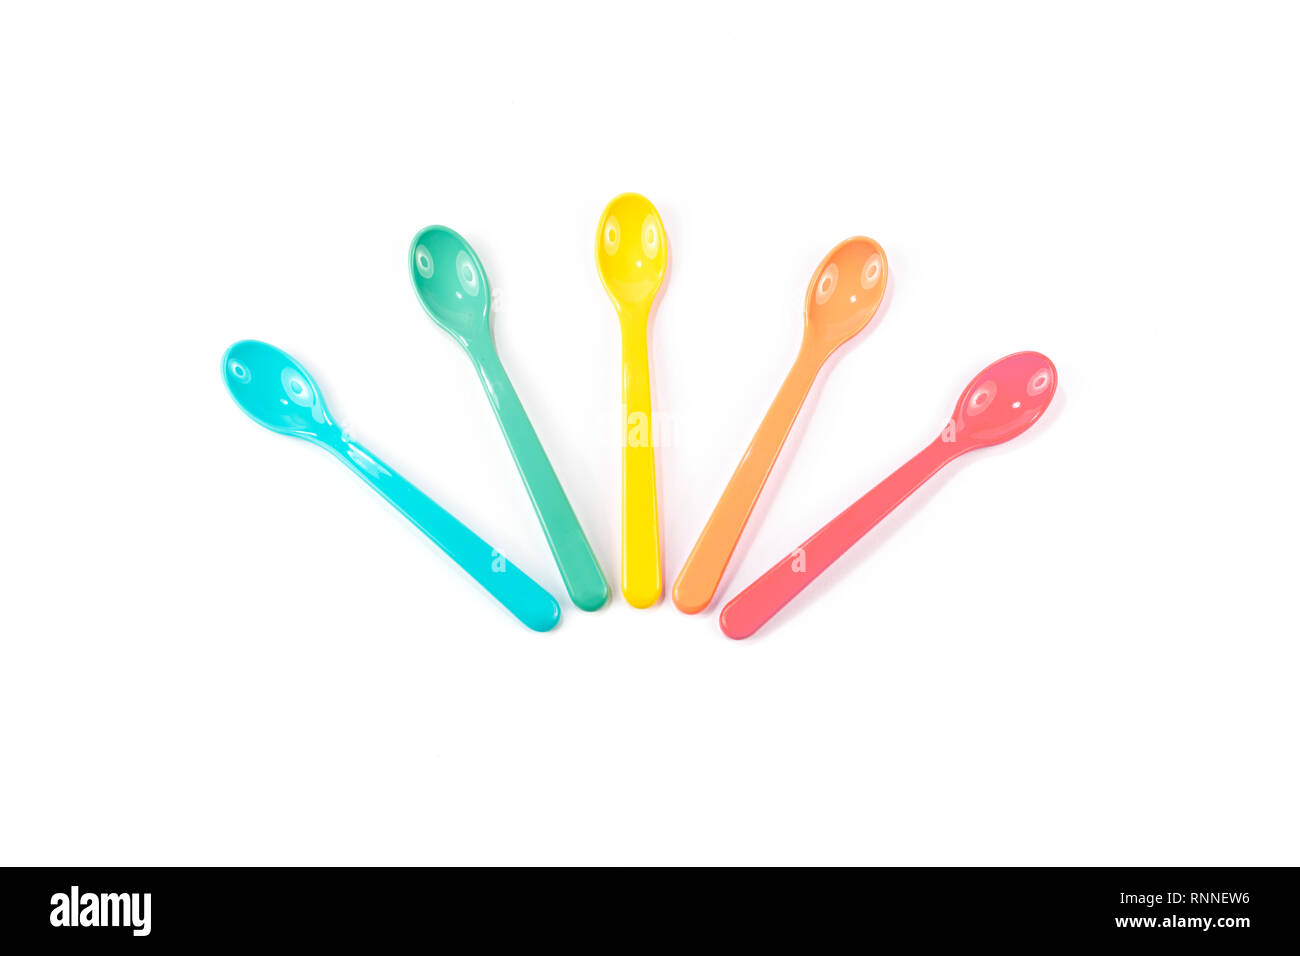 https://c8.alamy.com/comp/RNNEW6/colorful-bunch-of-plastic-baby-spoons-on-white-background-happy-food-RNNEW6.jpg